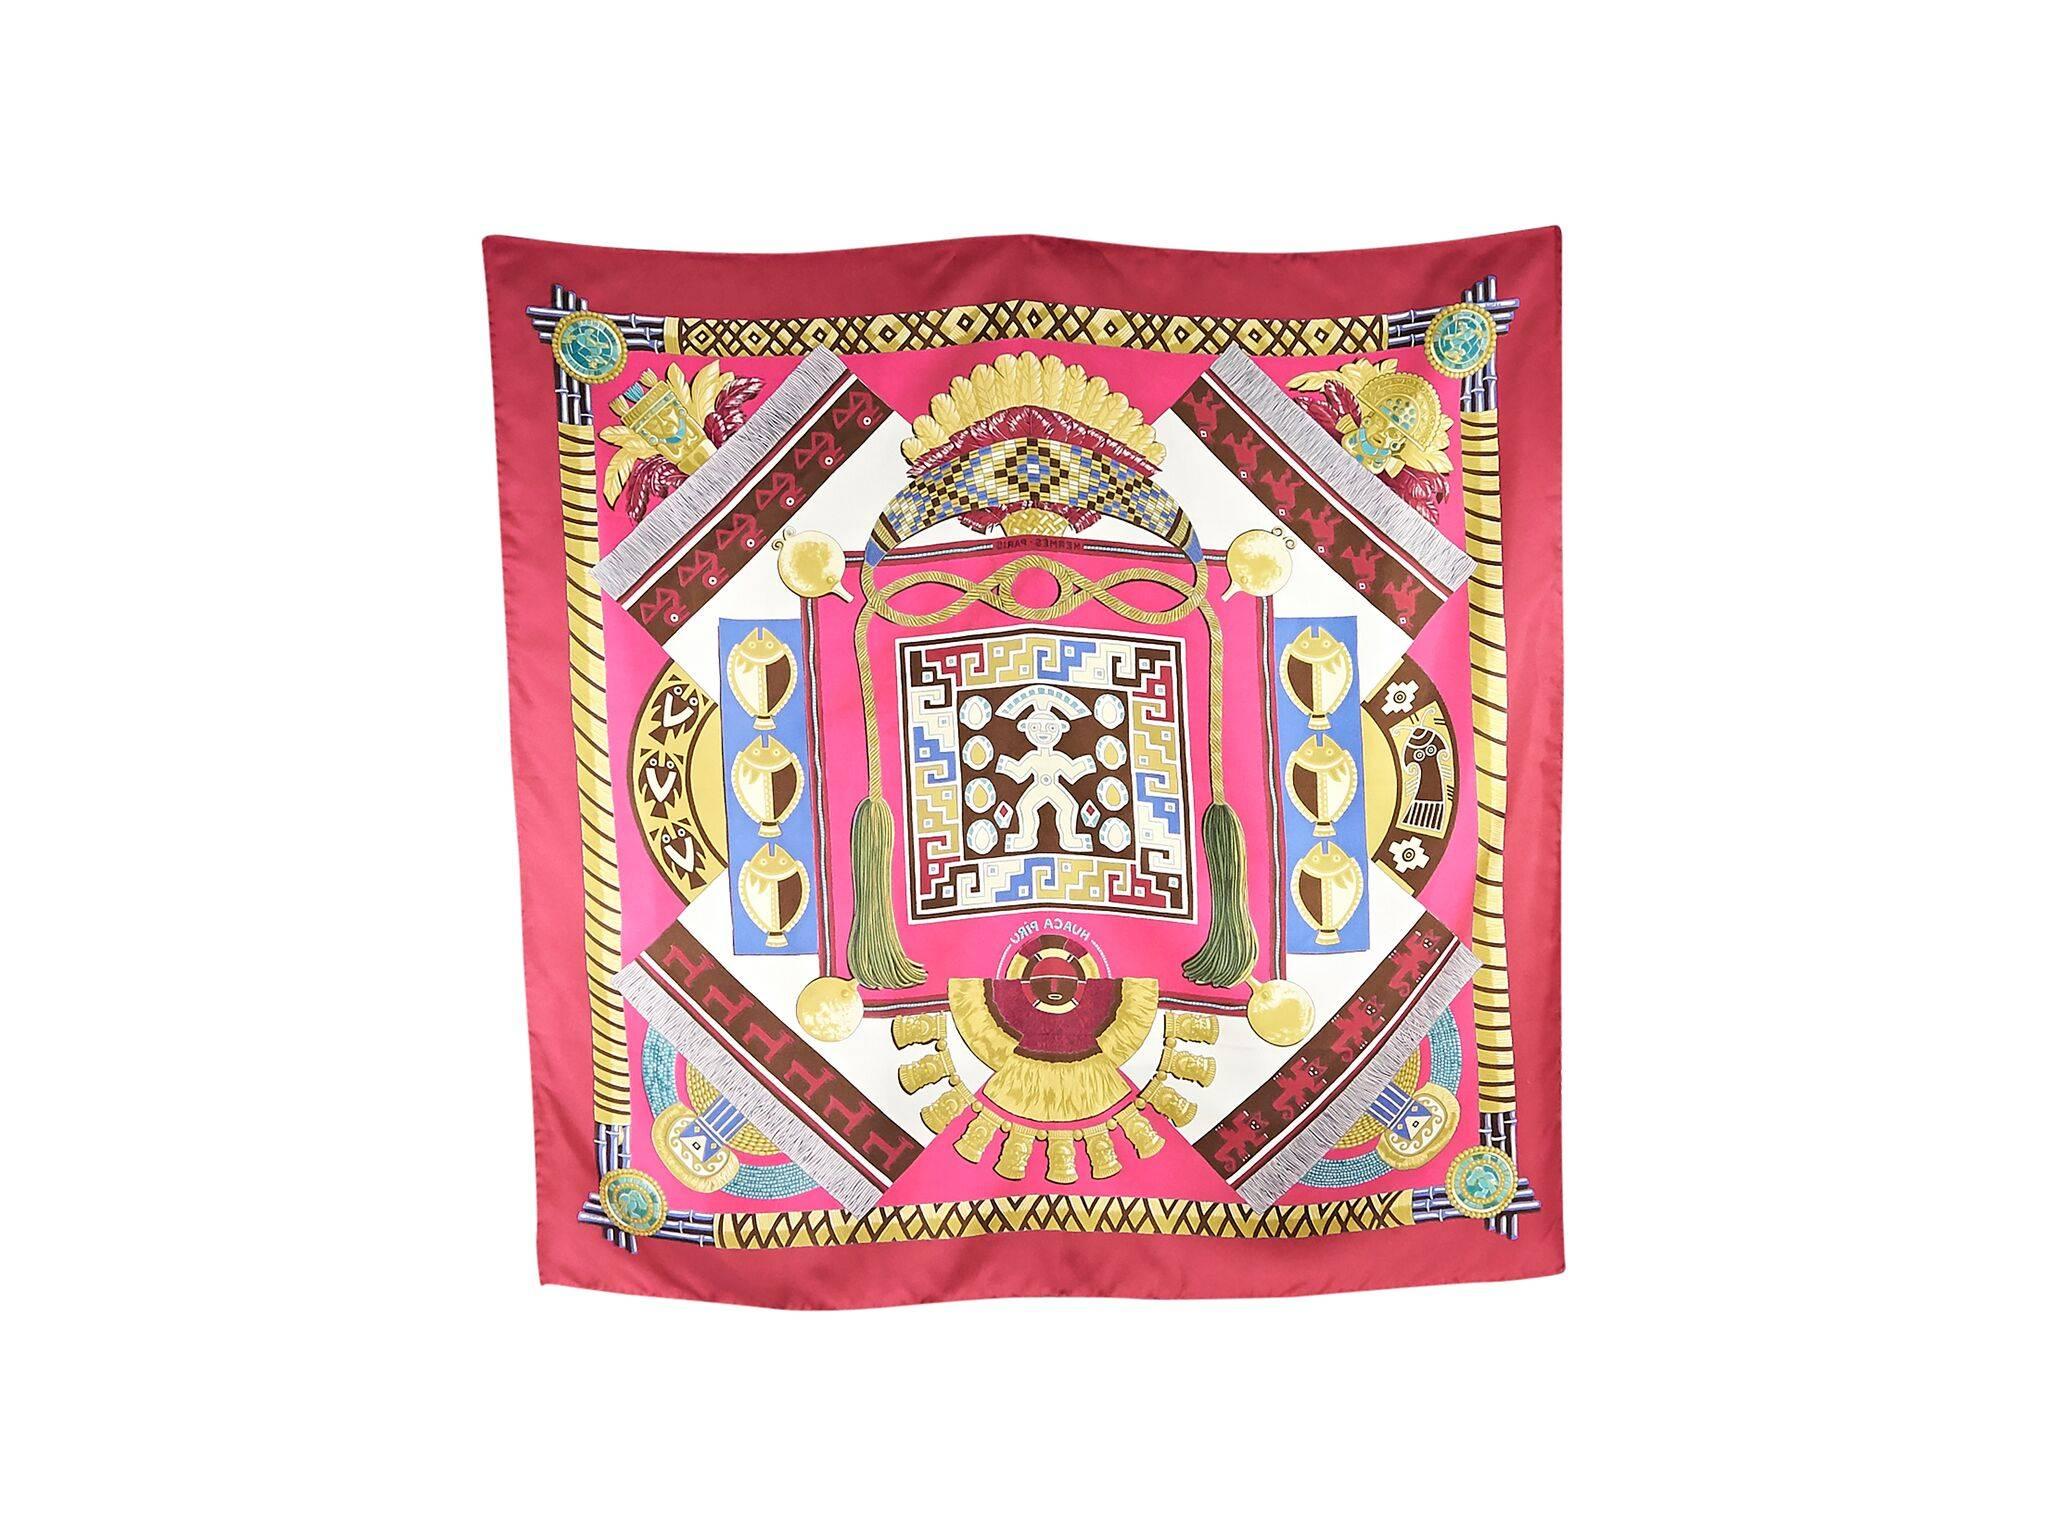 Product details:  Multicolor Huaca Piru printed silk scarf by Hermes.  Limited edition holiday box included.  
Condition: Pre-owned. Very good.
Est. Retail $695